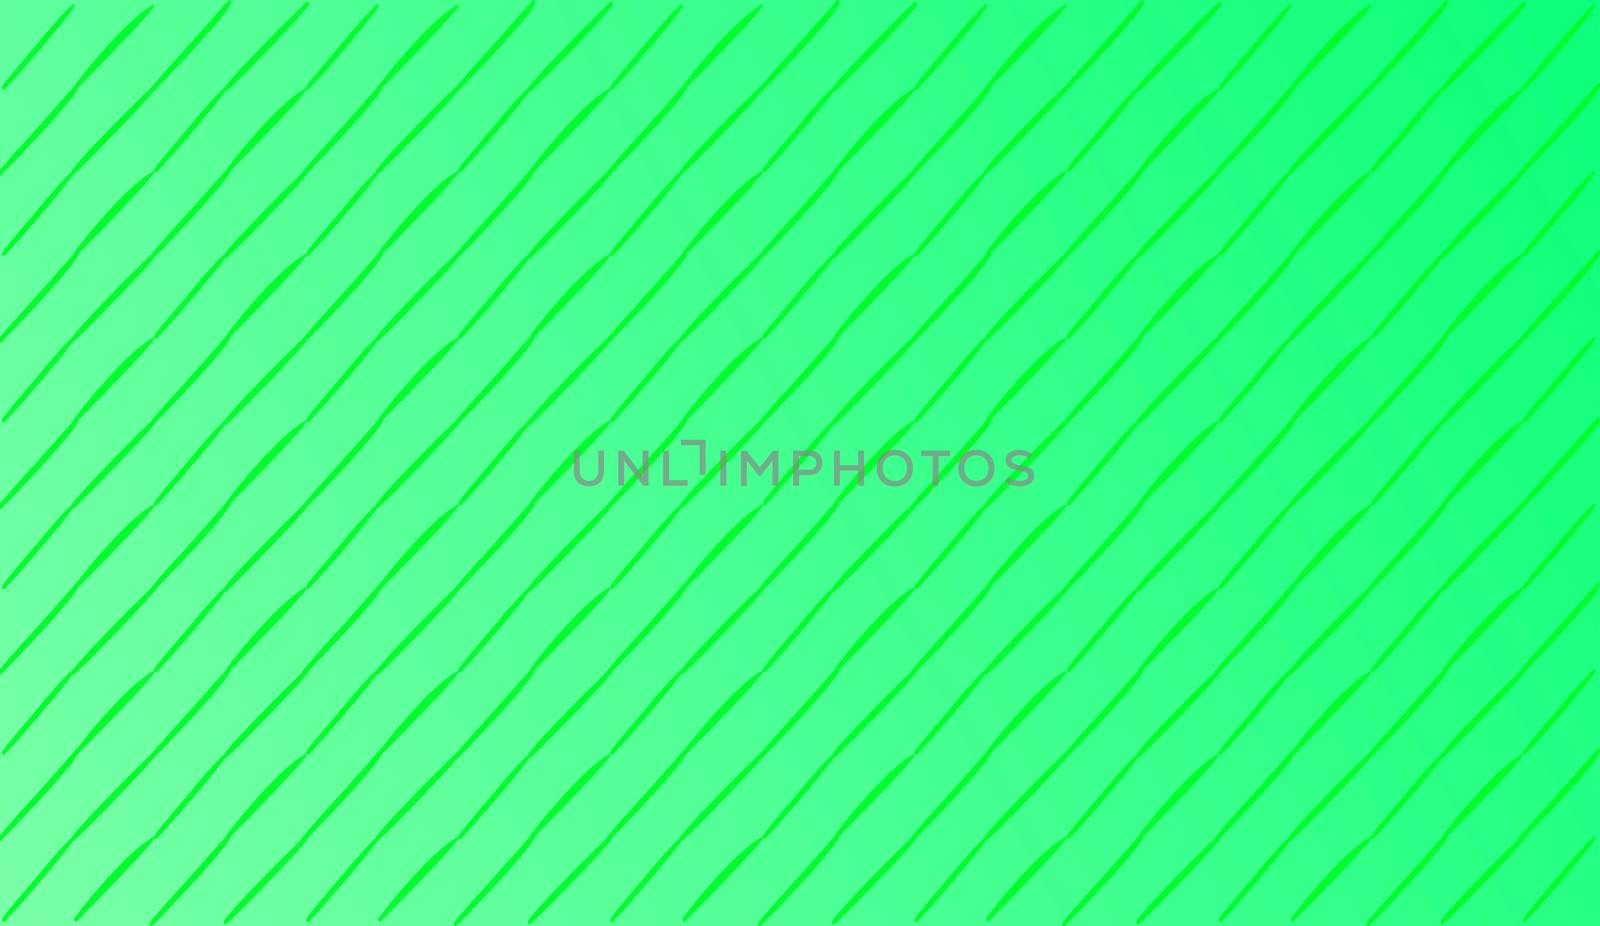 abstract background with diagonal green cartoon lines